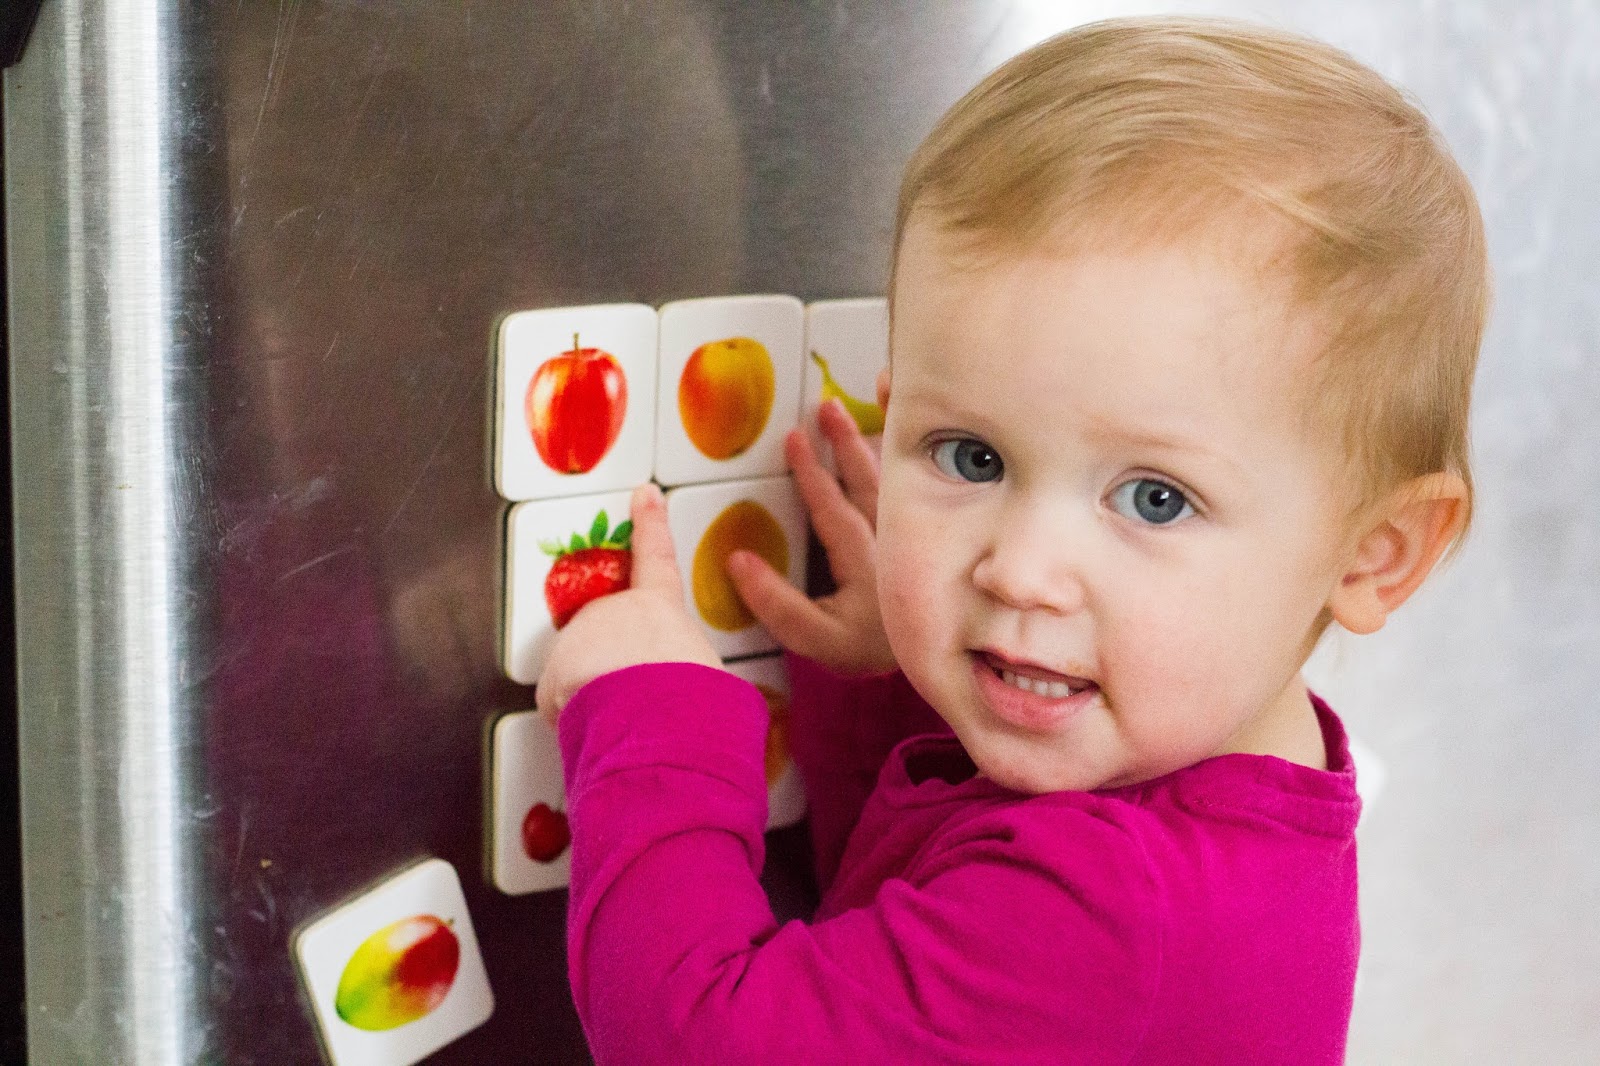 Montessori Parenting: Let's Stop Rushing Toddlers